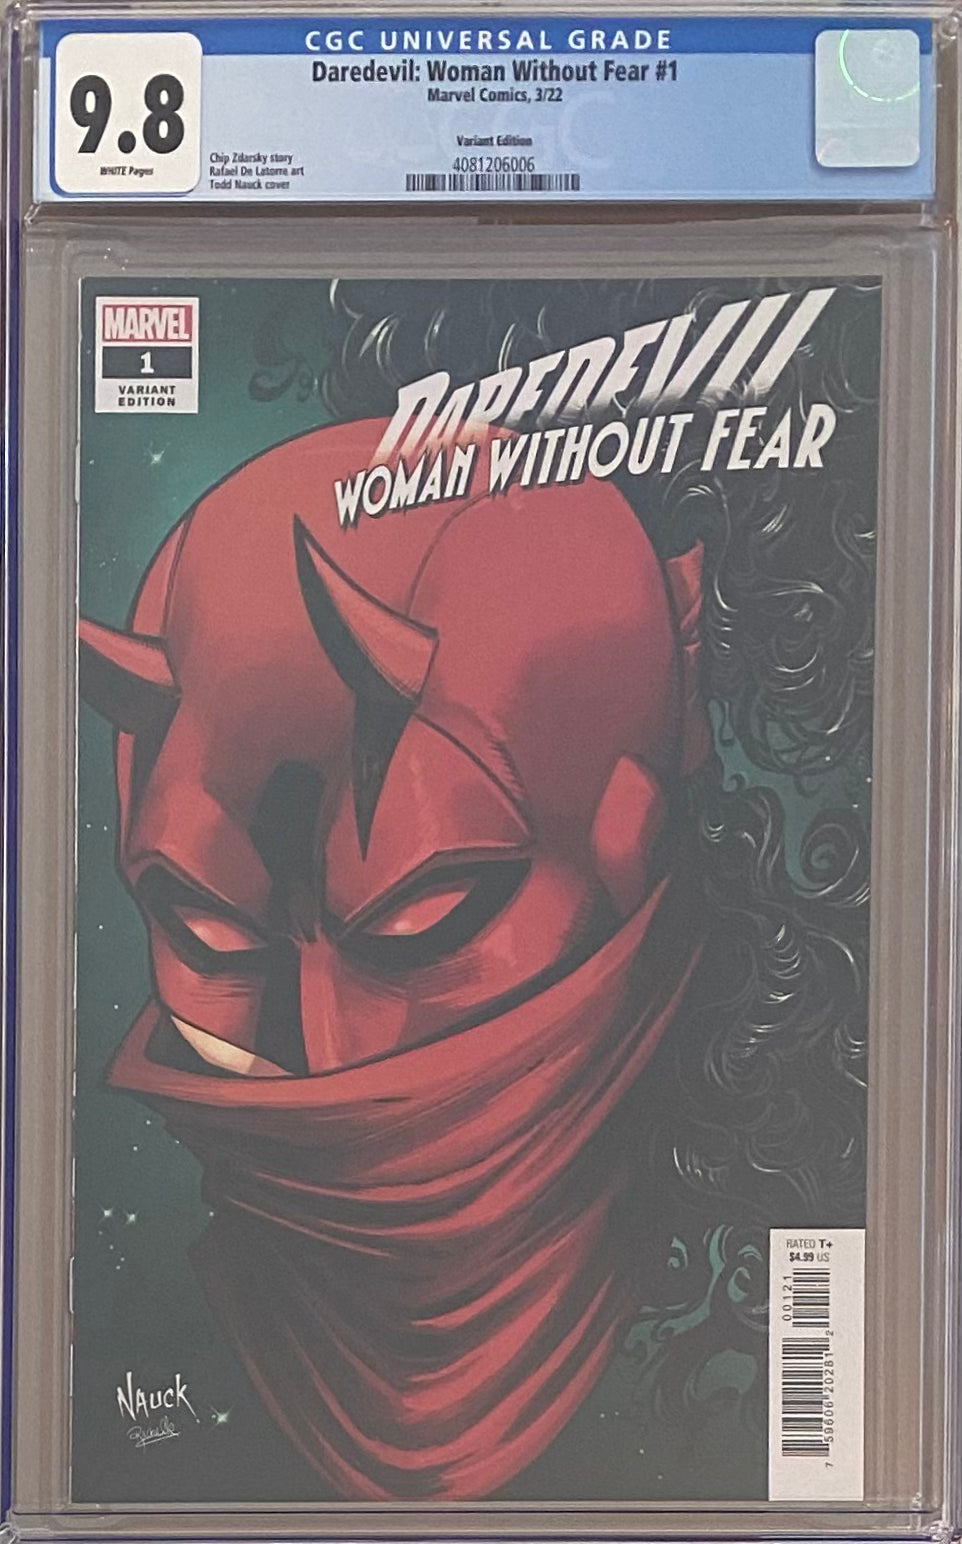 Daredevil: Woman Without Fear #1 Nauck Headshot Variant CGC 9.8